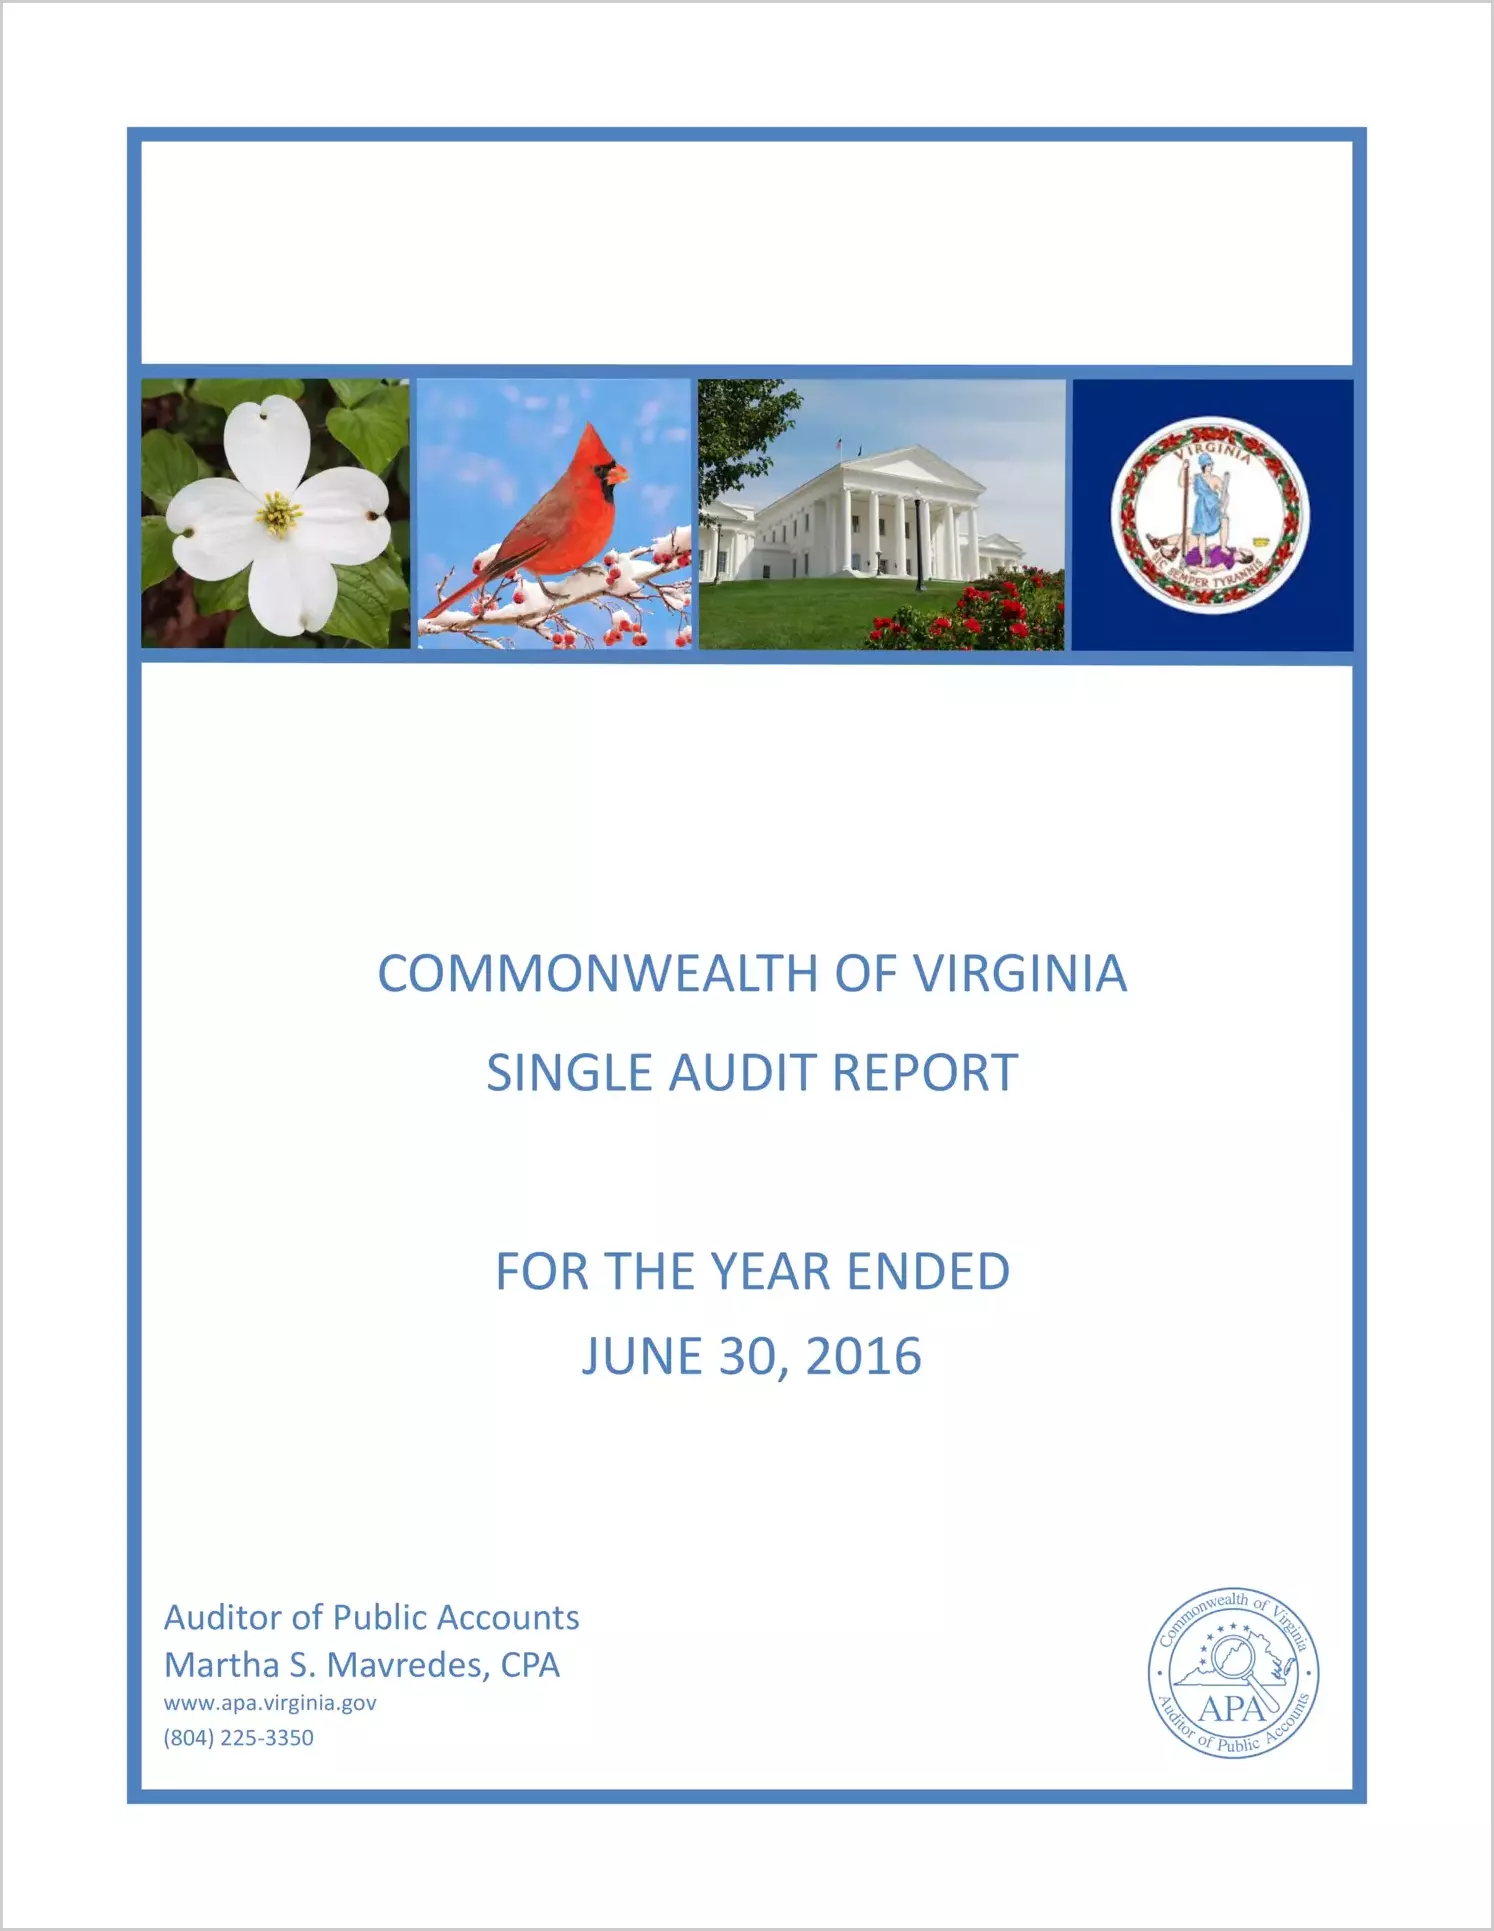 Commonwealth of Virginia Single Audit Report for the Year Ended June 30, 2016